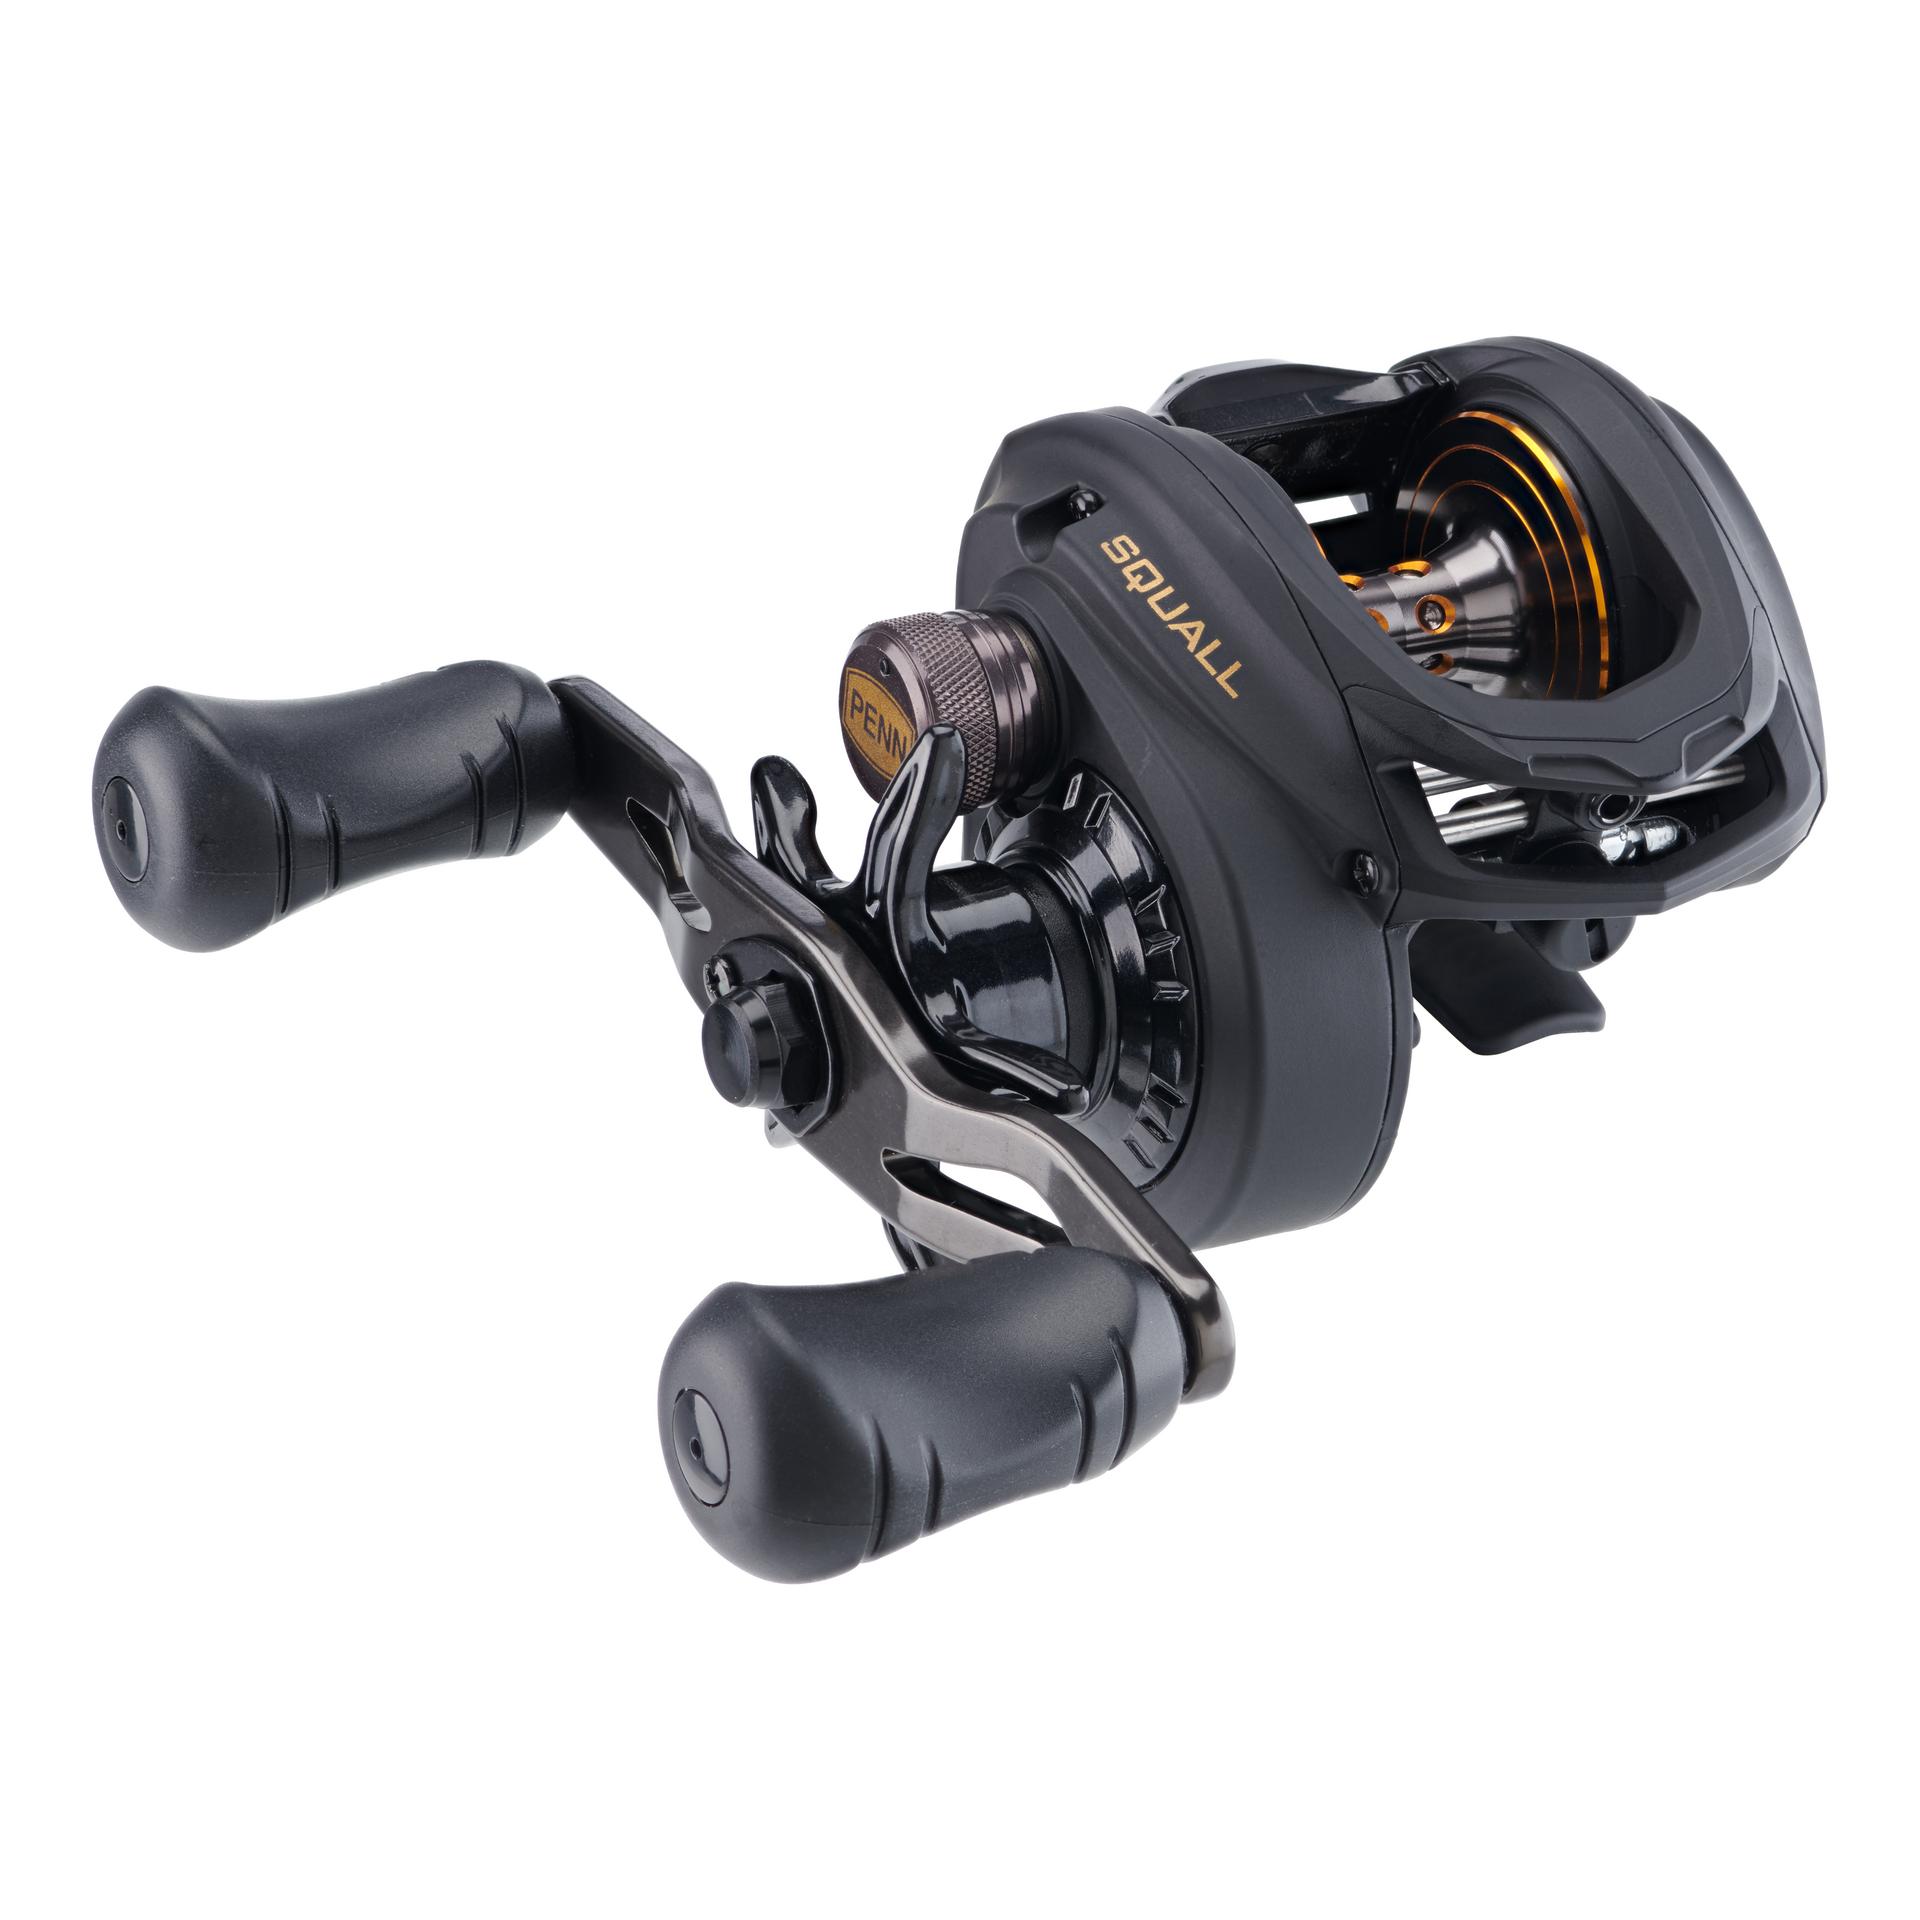 Top 8 Best Rated Baitcasting Reels Of 2024 